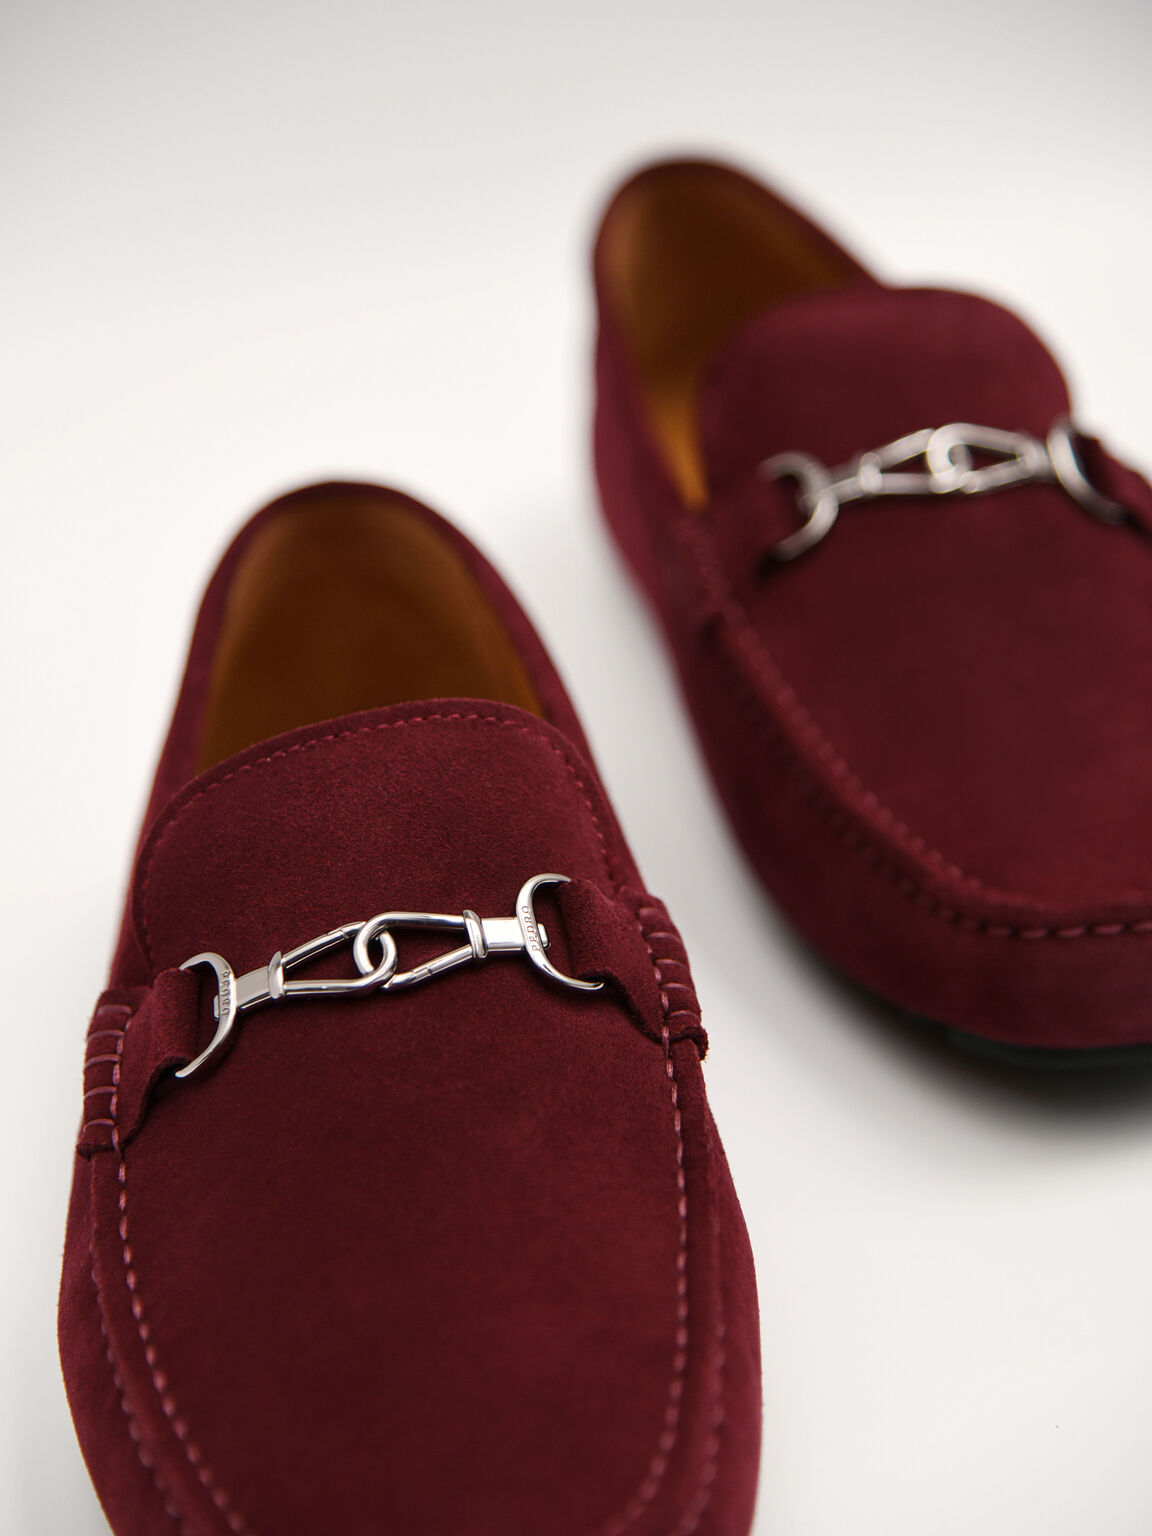 Suede Moccasins with Metal Bit, Maroon